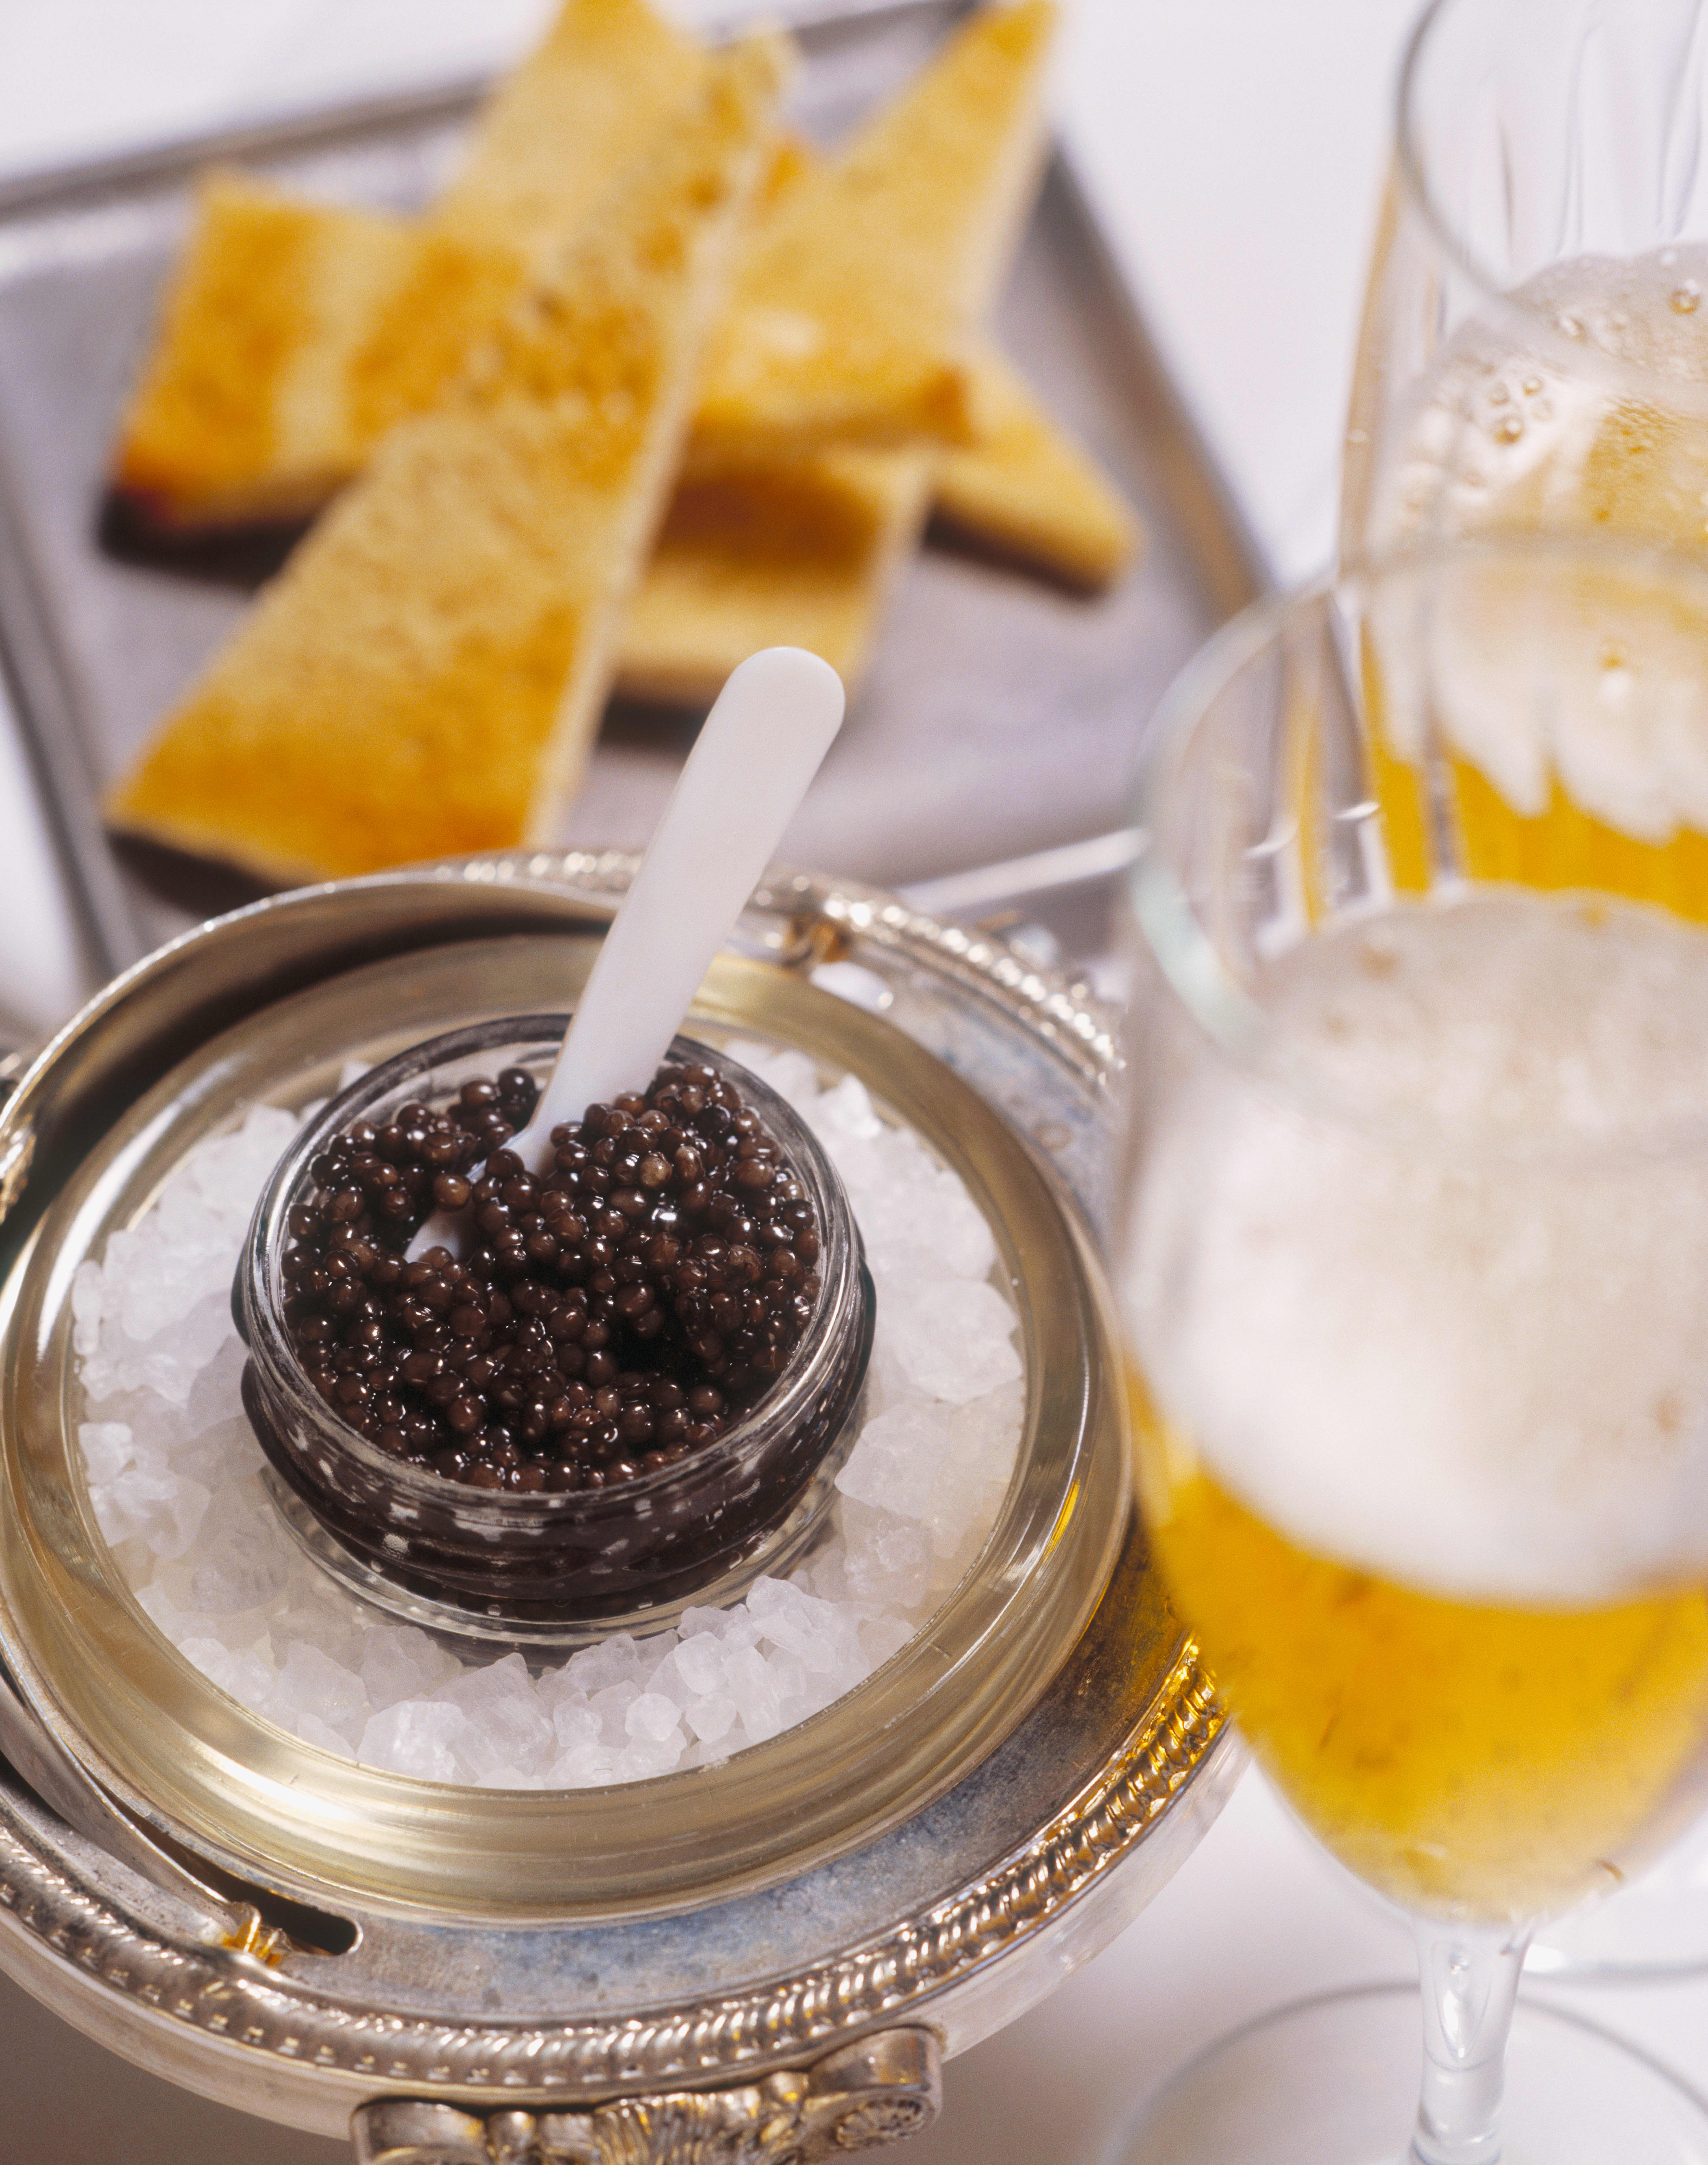 What Makes Caviar So Expensive?